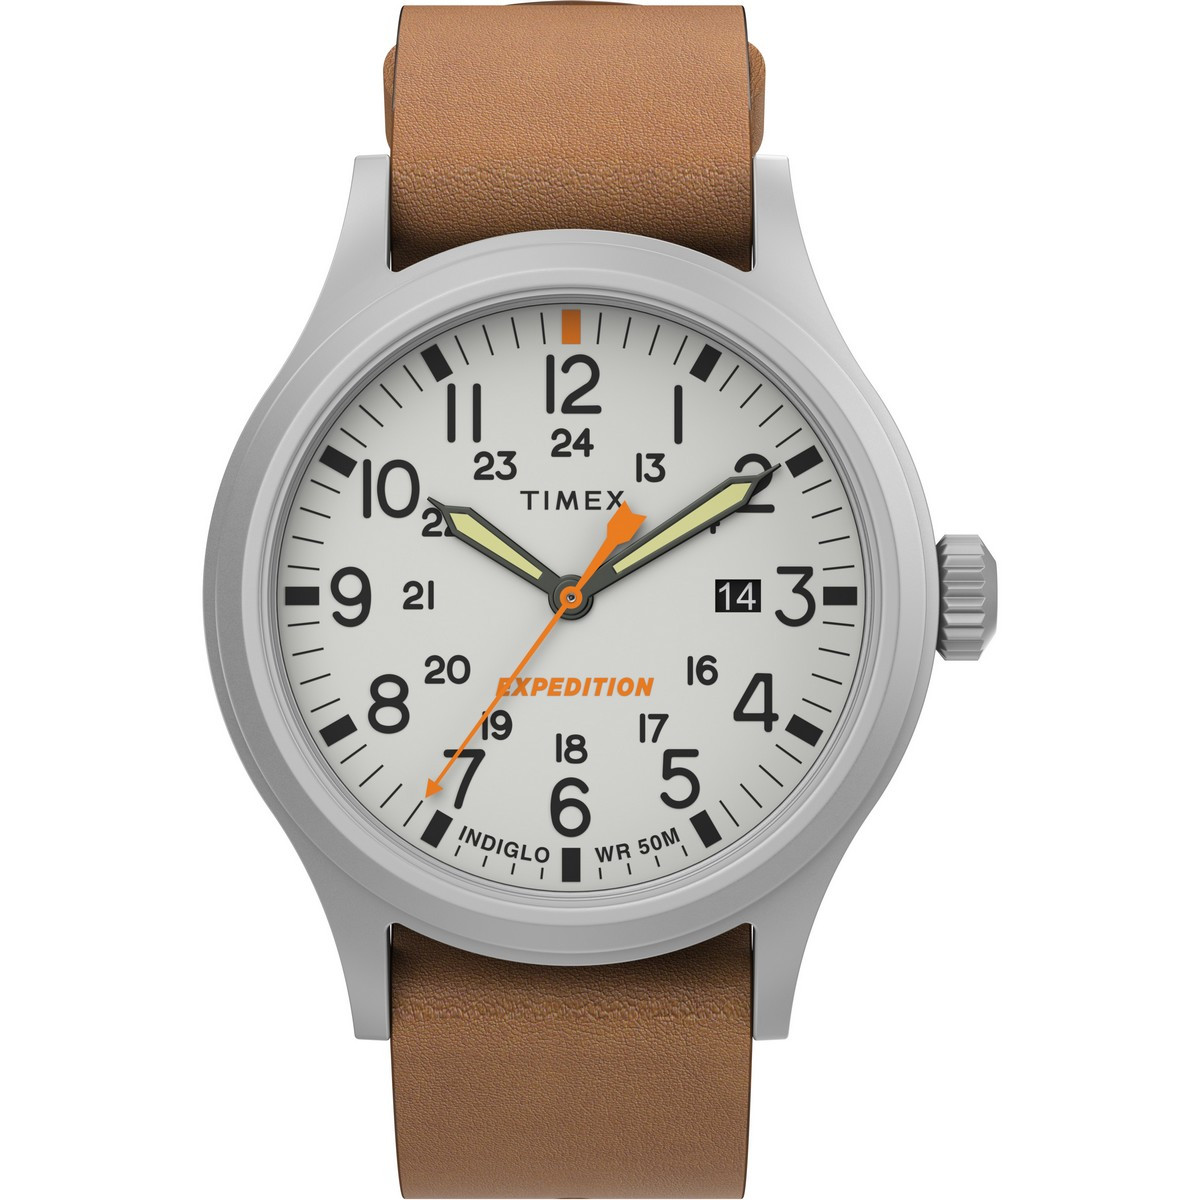 TIMEX EXPEDITION CUIR COGNAC 50M